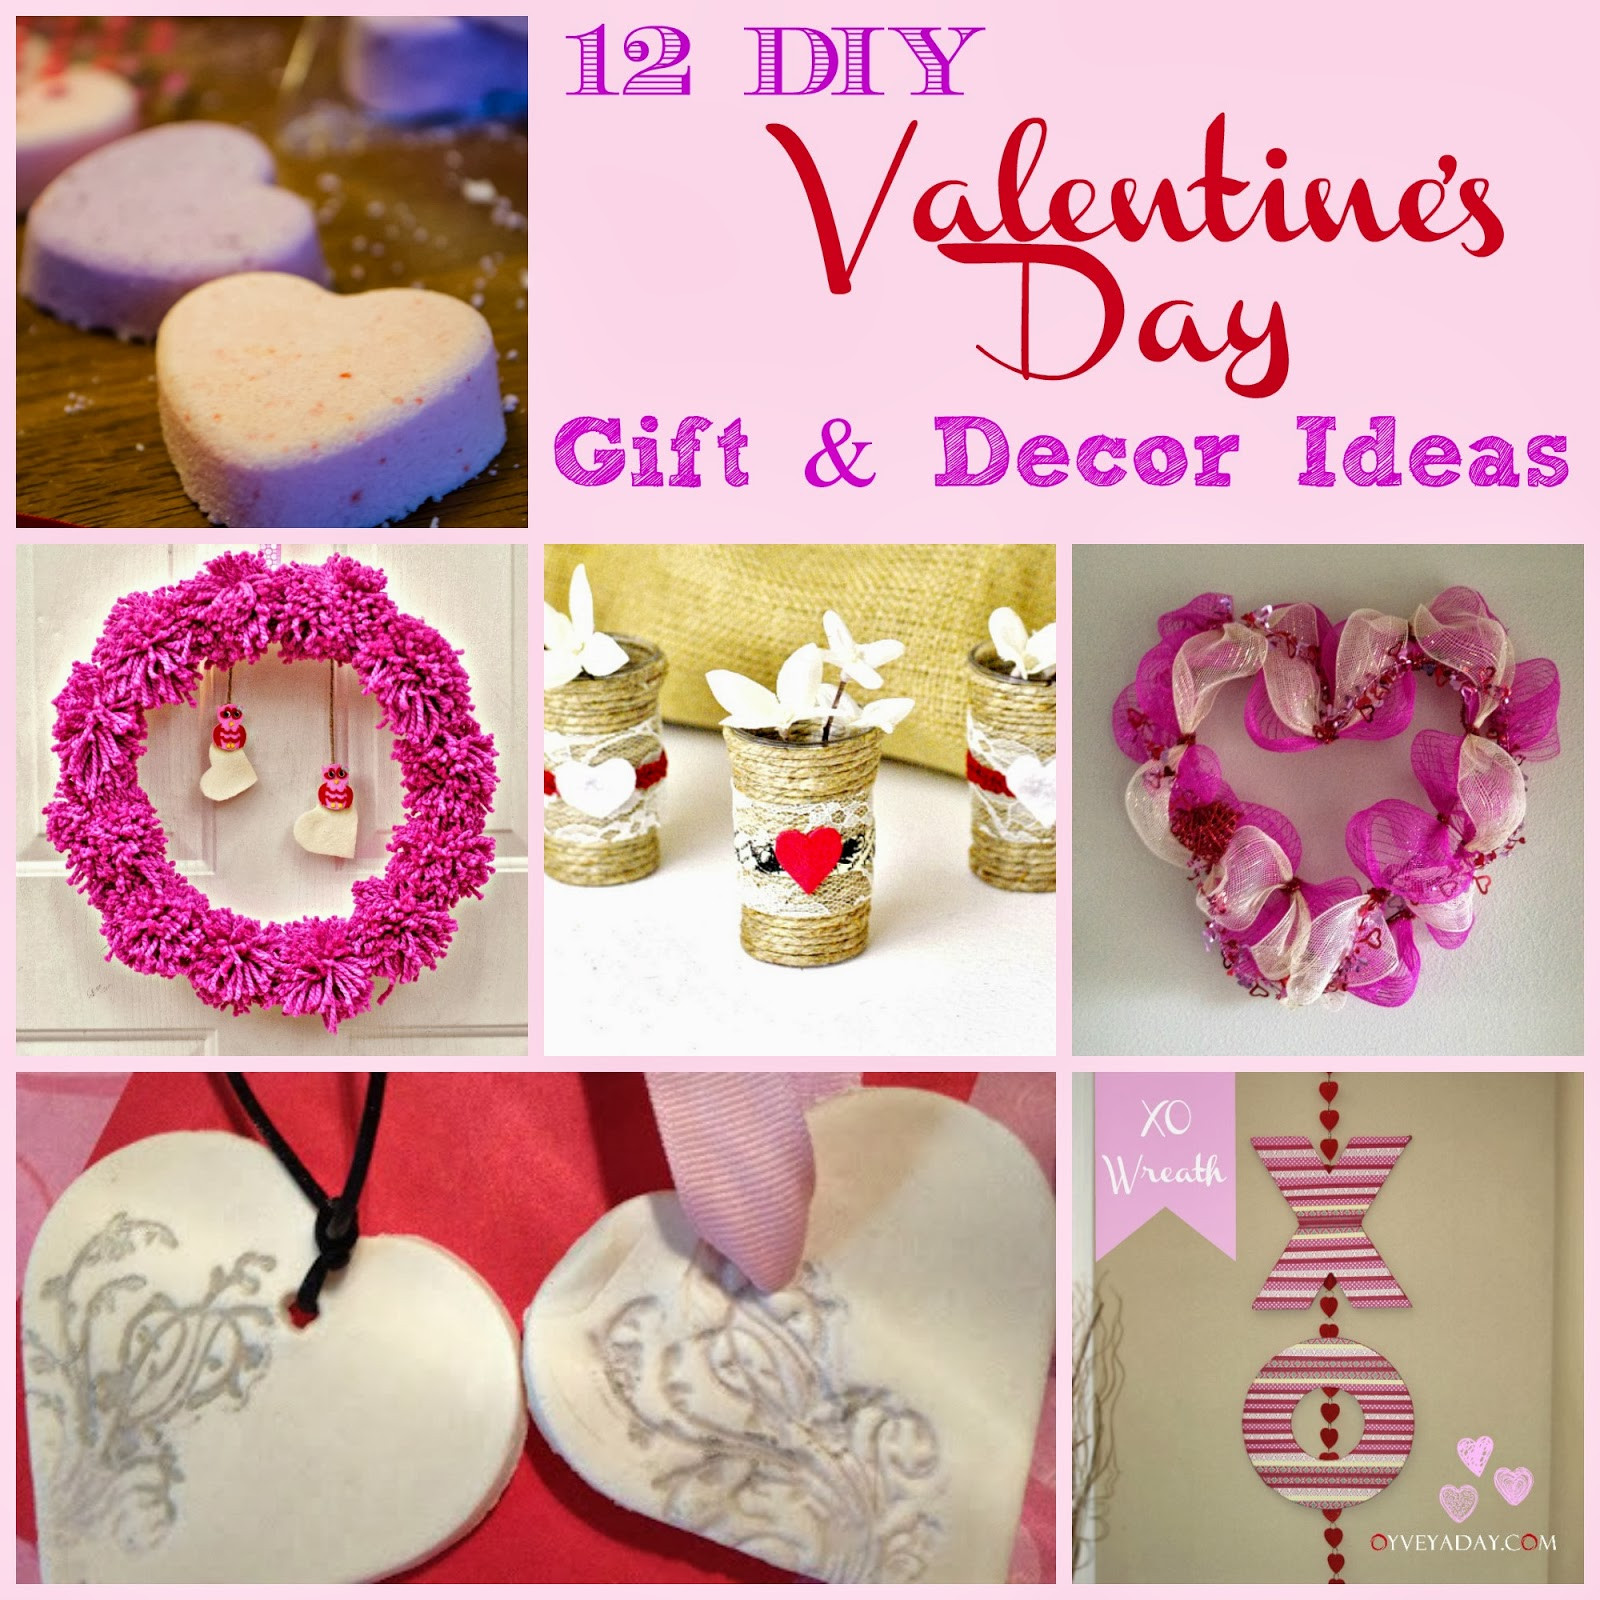 Valentines Day Home Made Gifts
 12 DIY Valentine s Day Gift & Decor Ideas Outnumbered 3 to 1